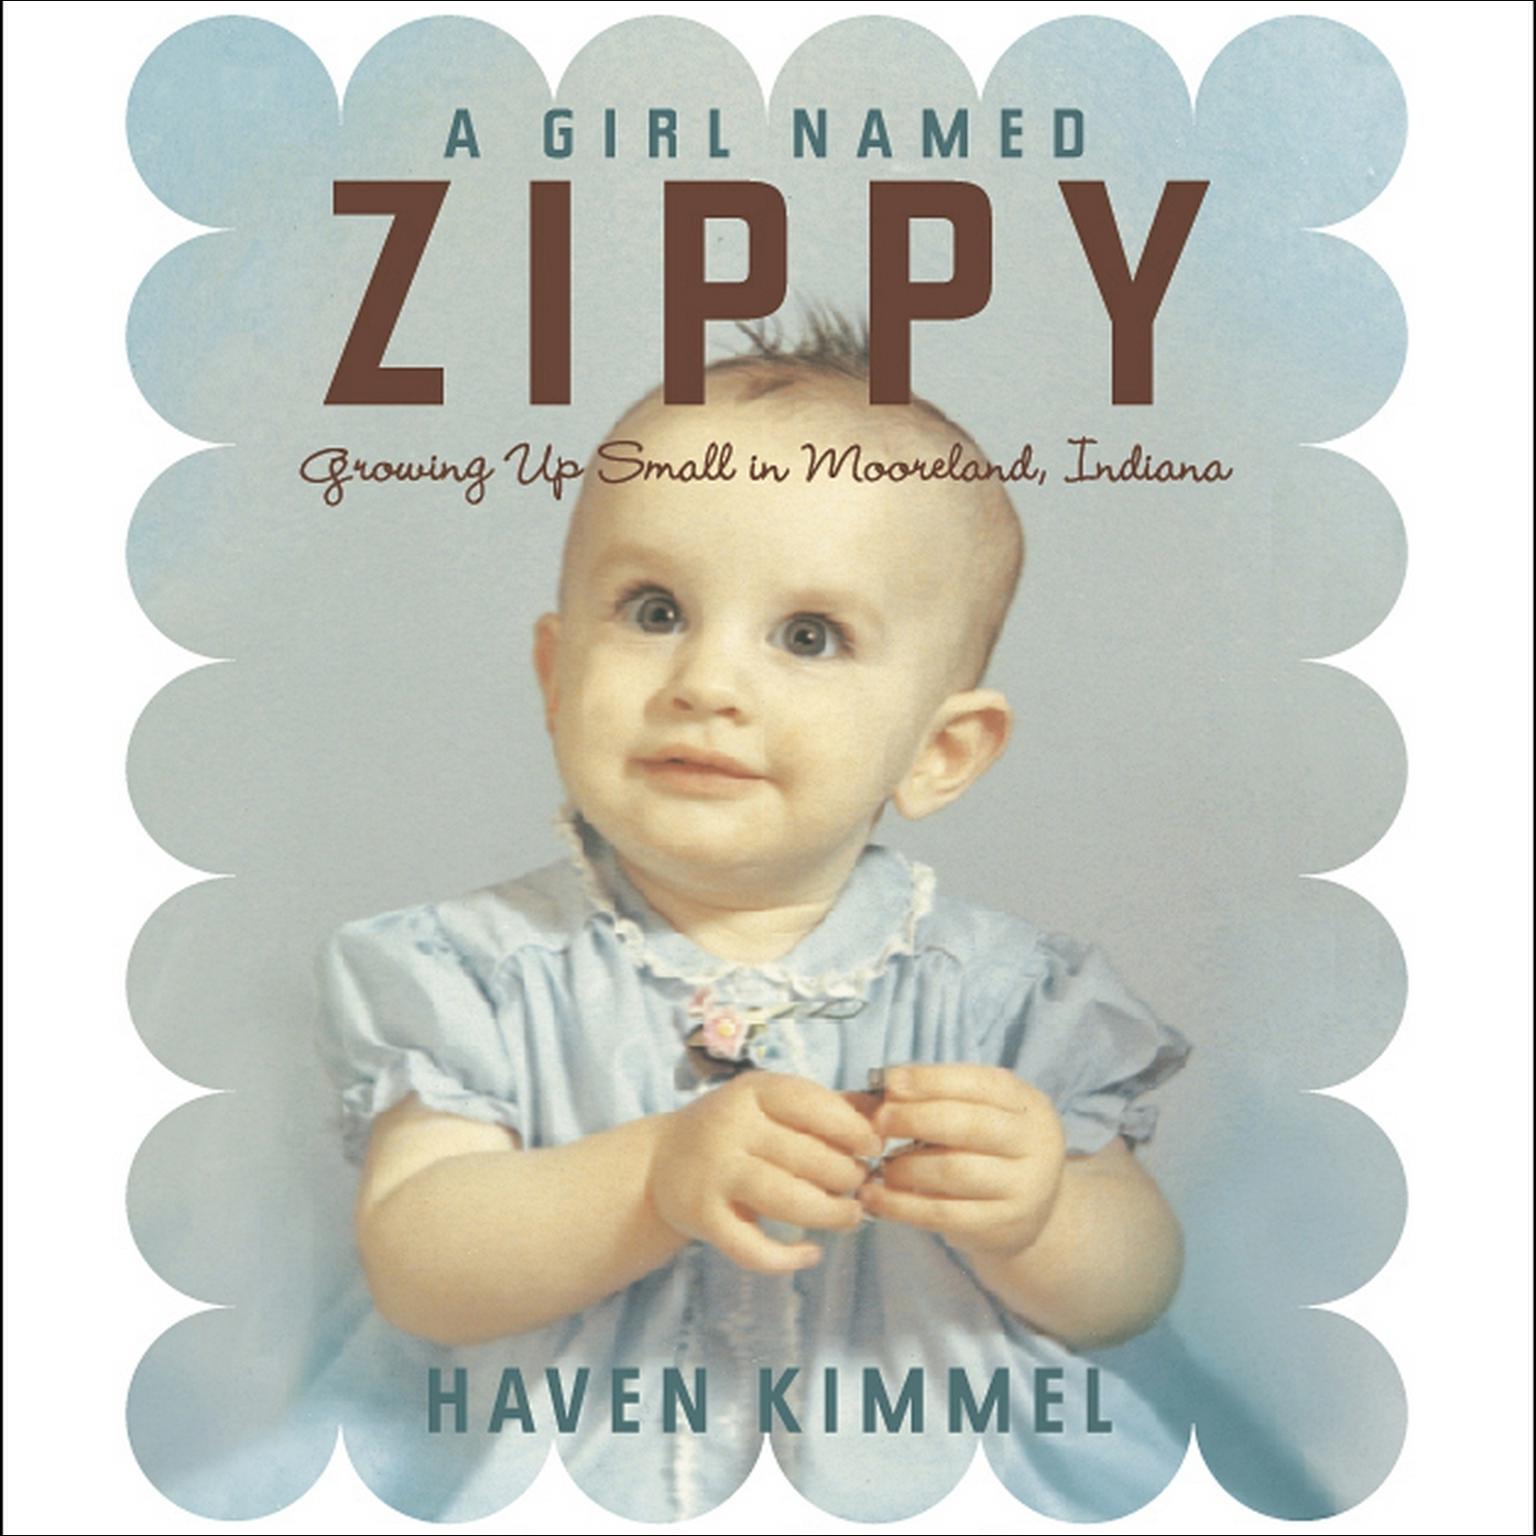 A Girl Named Zippy: Growing Up Small in Mooreland, Indiana Audiobook, by Haven Kimmel